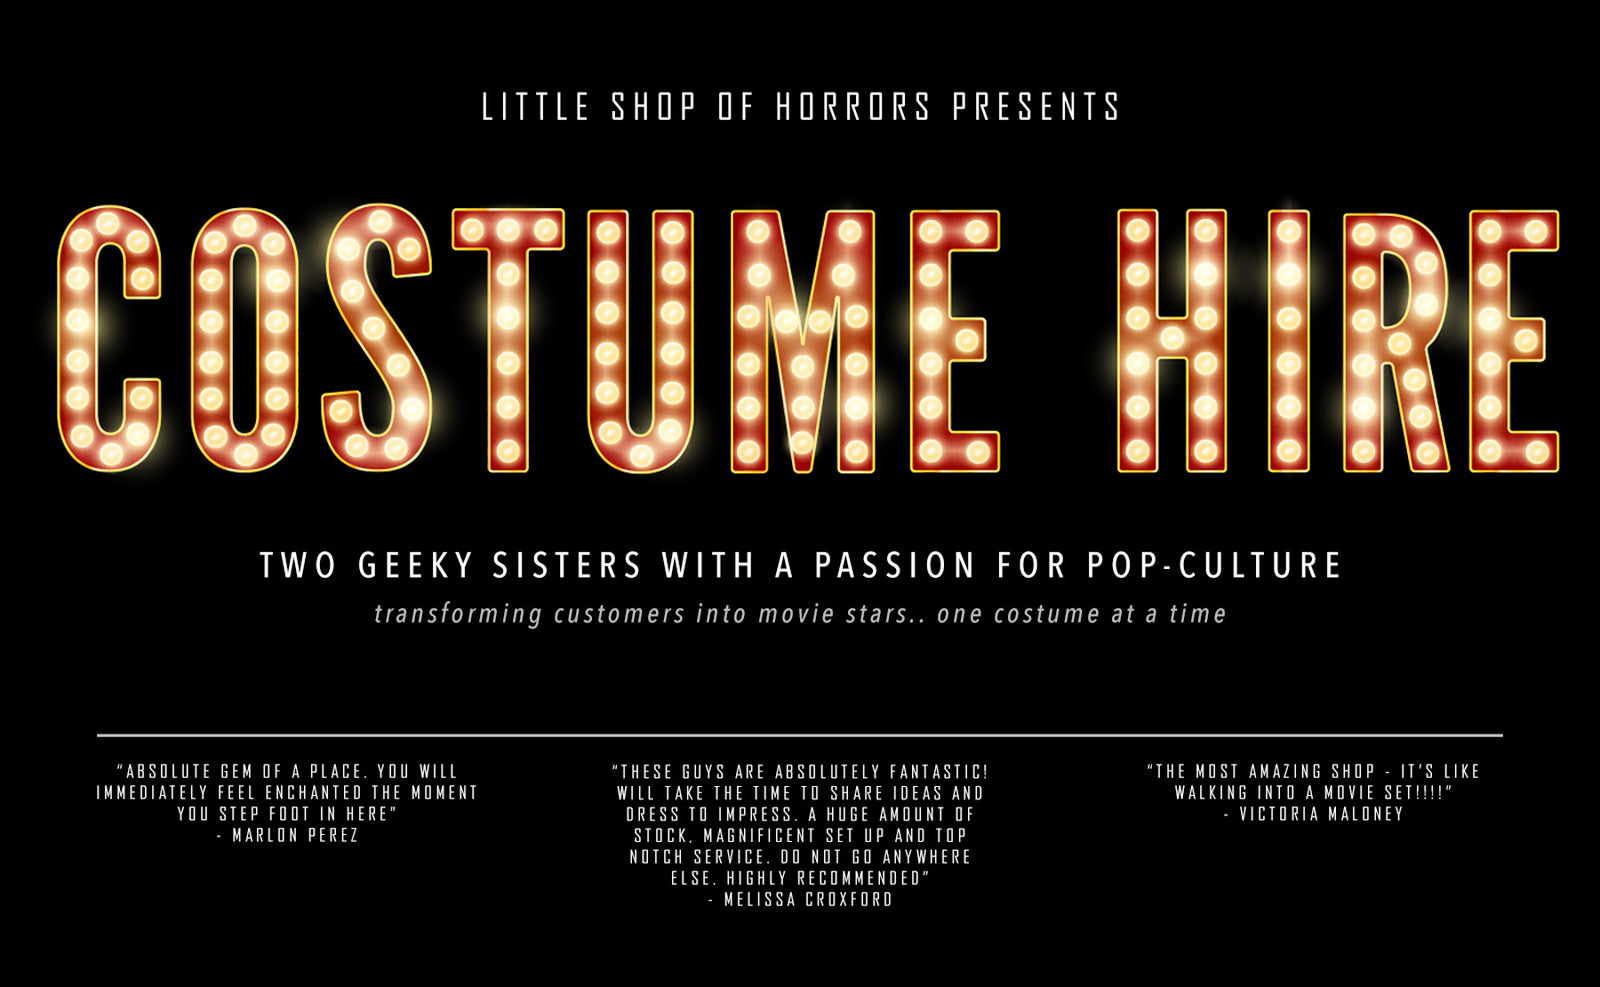 Little Shop of Horrors Presents Costume Hire